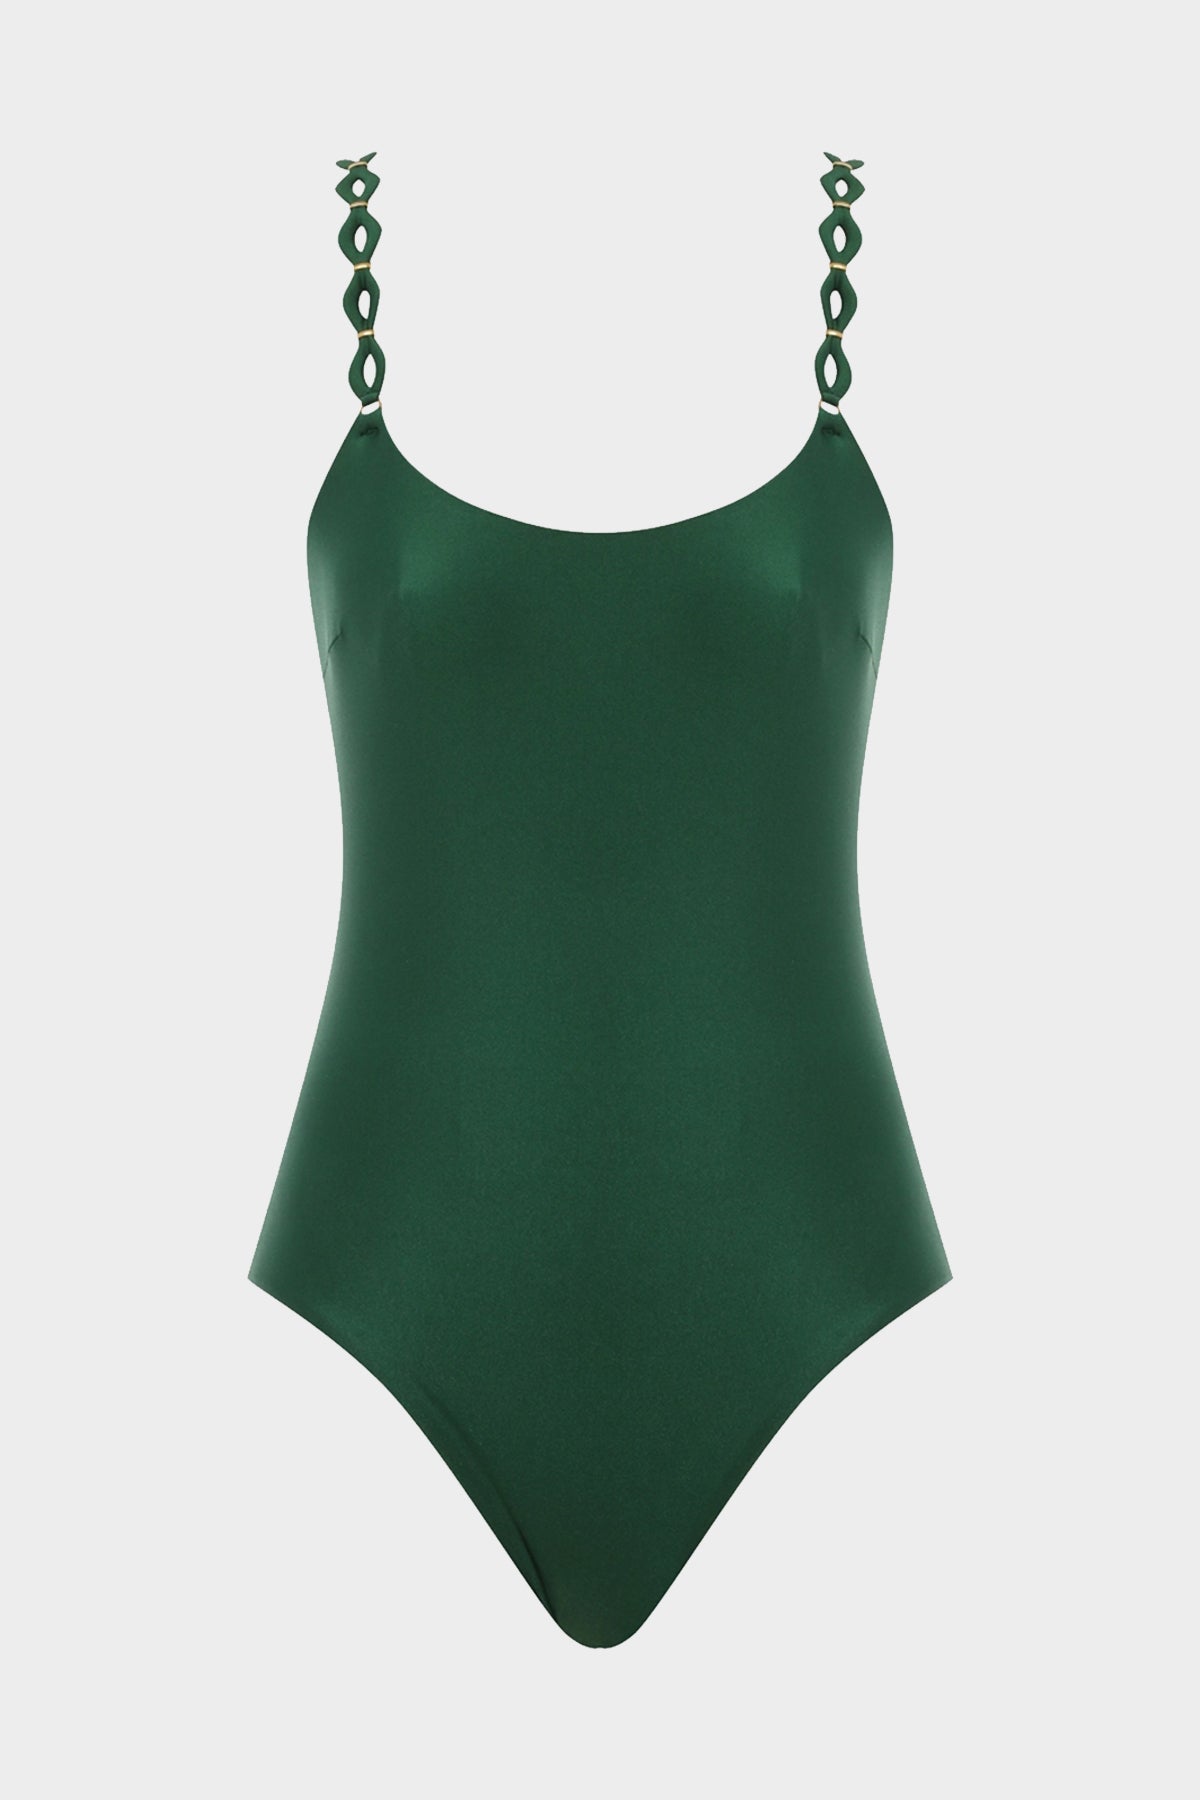 August Diamond Trim One-Piece in Forest Green - shop-olivia.com